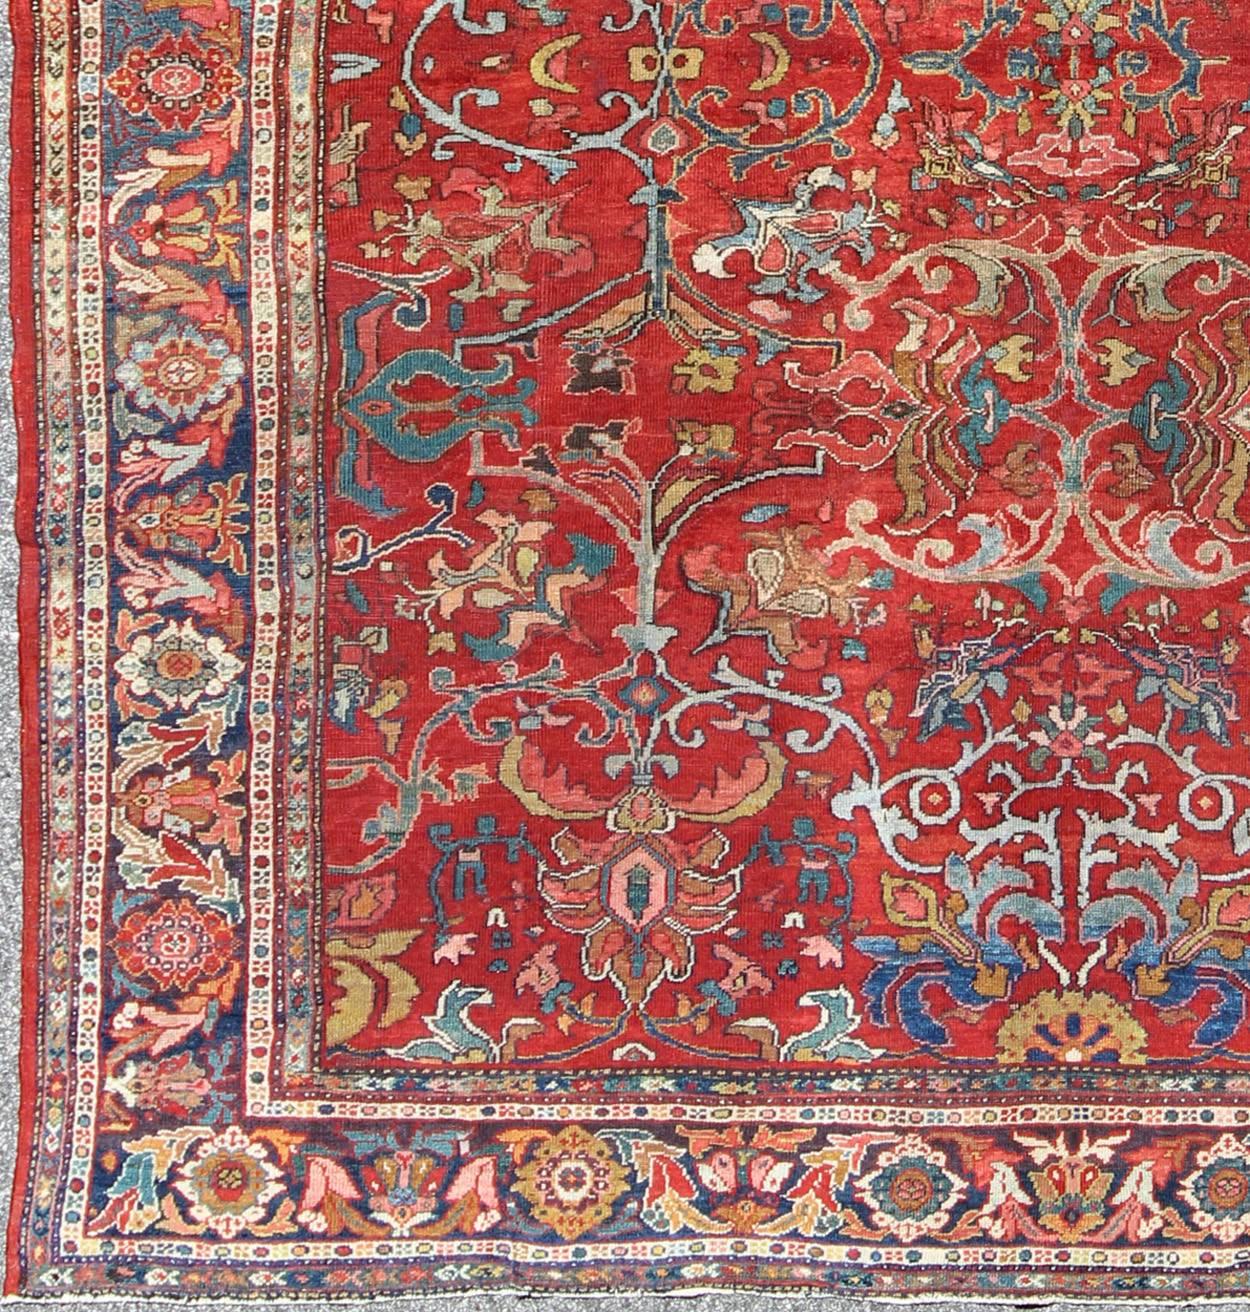 Exceptional, antique Persian Sultanabad rug. Keivan Woven Arts / rug V21-0308-151, country of origin / type: Iran / Kerman , circa 1900.

Measures: 8'1 x 9'10.  

    This exceptional, antique Sultanabad showcases a marvelous design and exquisite